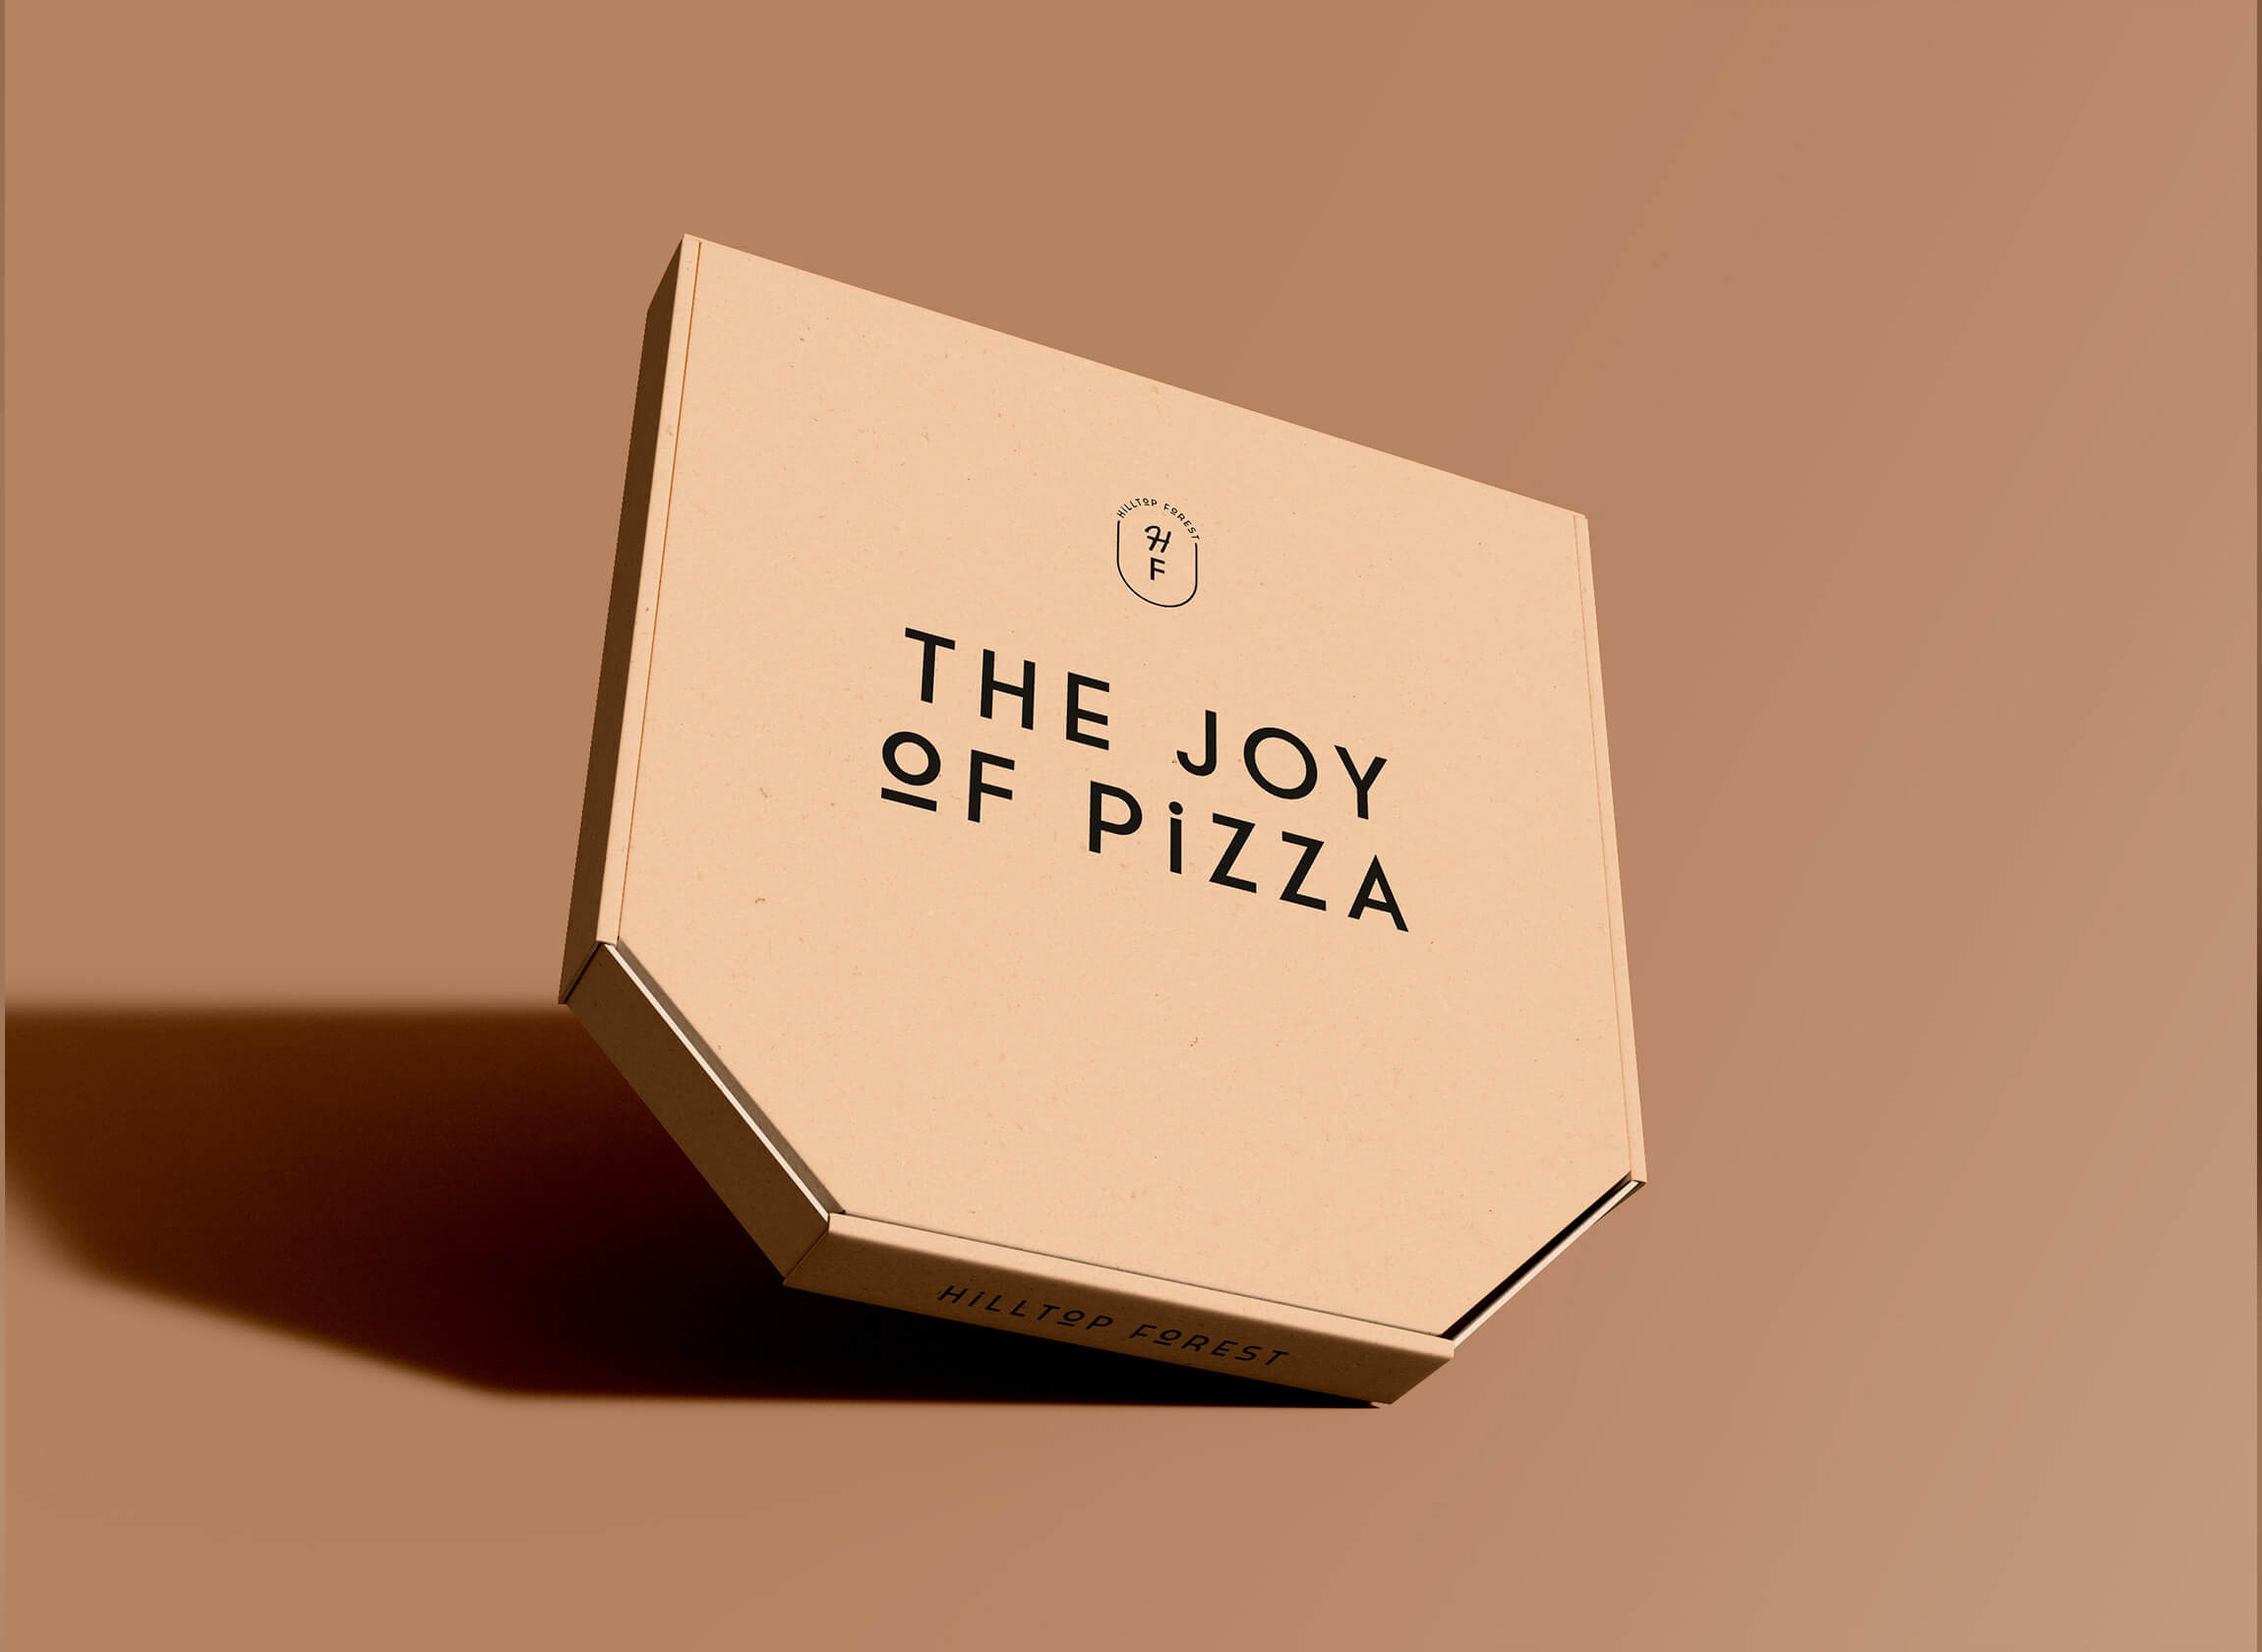 Hiltop Forest branded pizza boxes